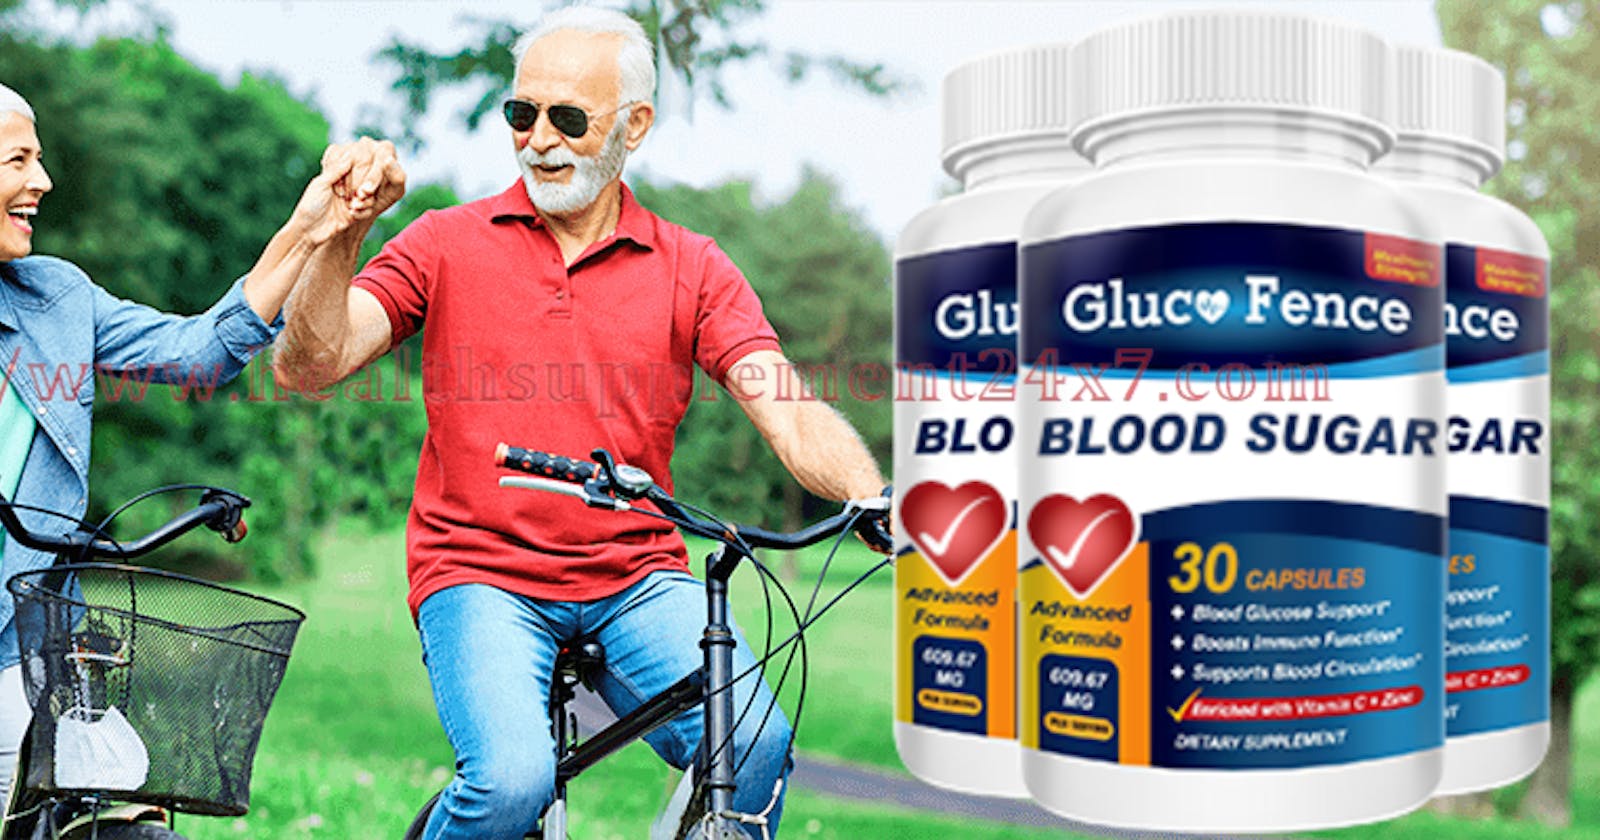 Gluco Fence (#1 Clinical Proven Gluco Fence Blood Sugar Formula) FDA Approved Or Hoax?